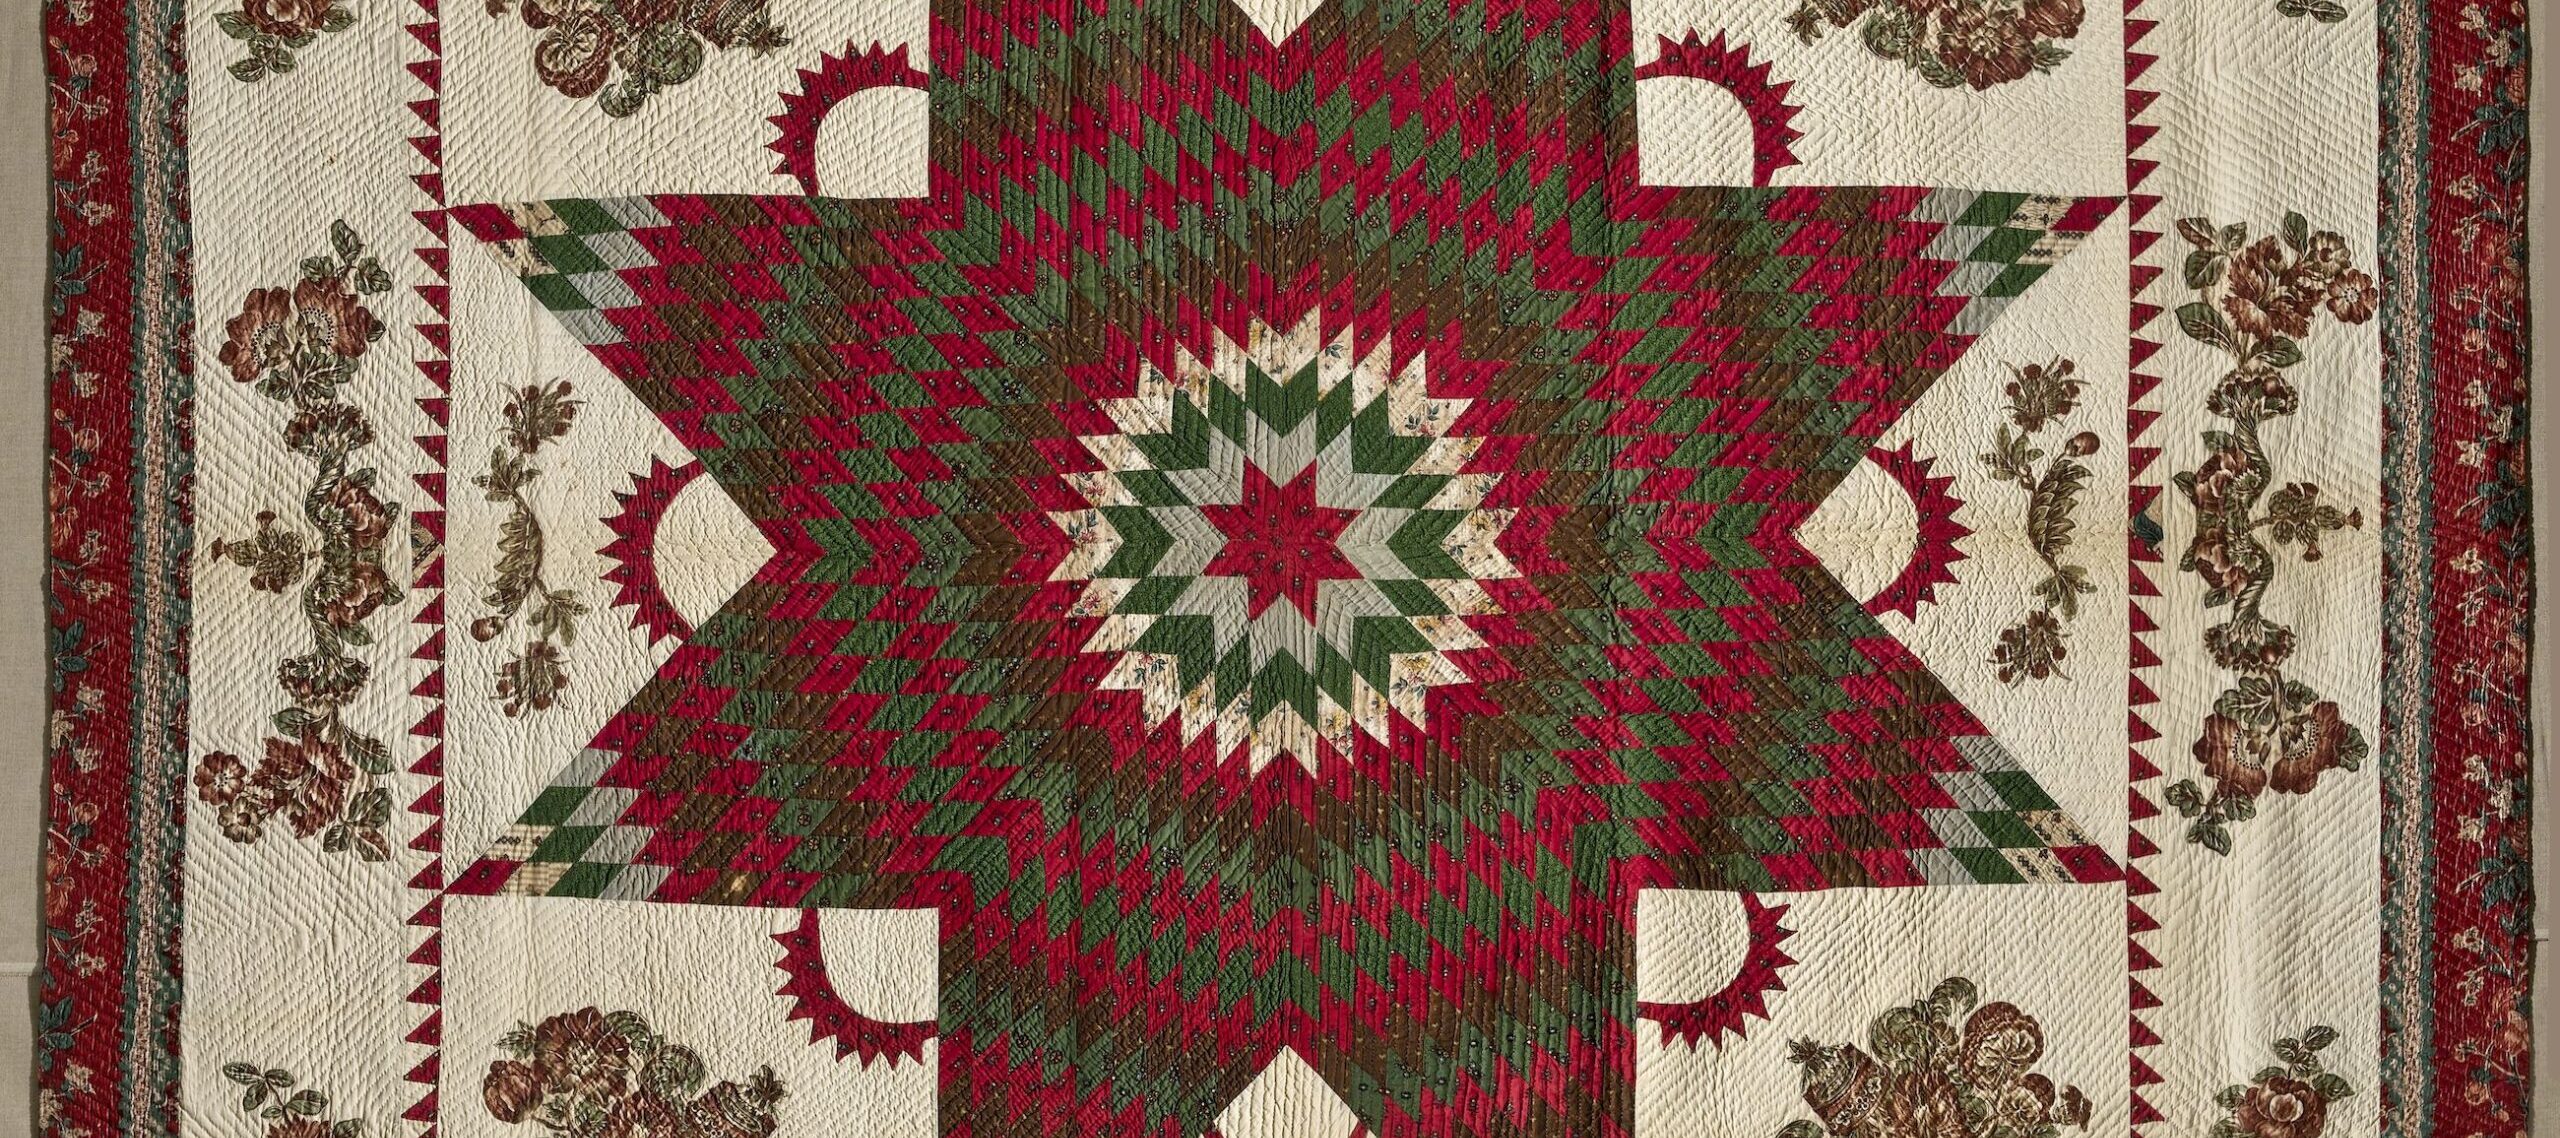 Vintage quilt in dark reds and greens on a cream background. In the center is a large eight-point Star of Bethlehem surrounded by Victorian floral appliques. The border, edged in dark red fabric, features matching floral garland appliques.